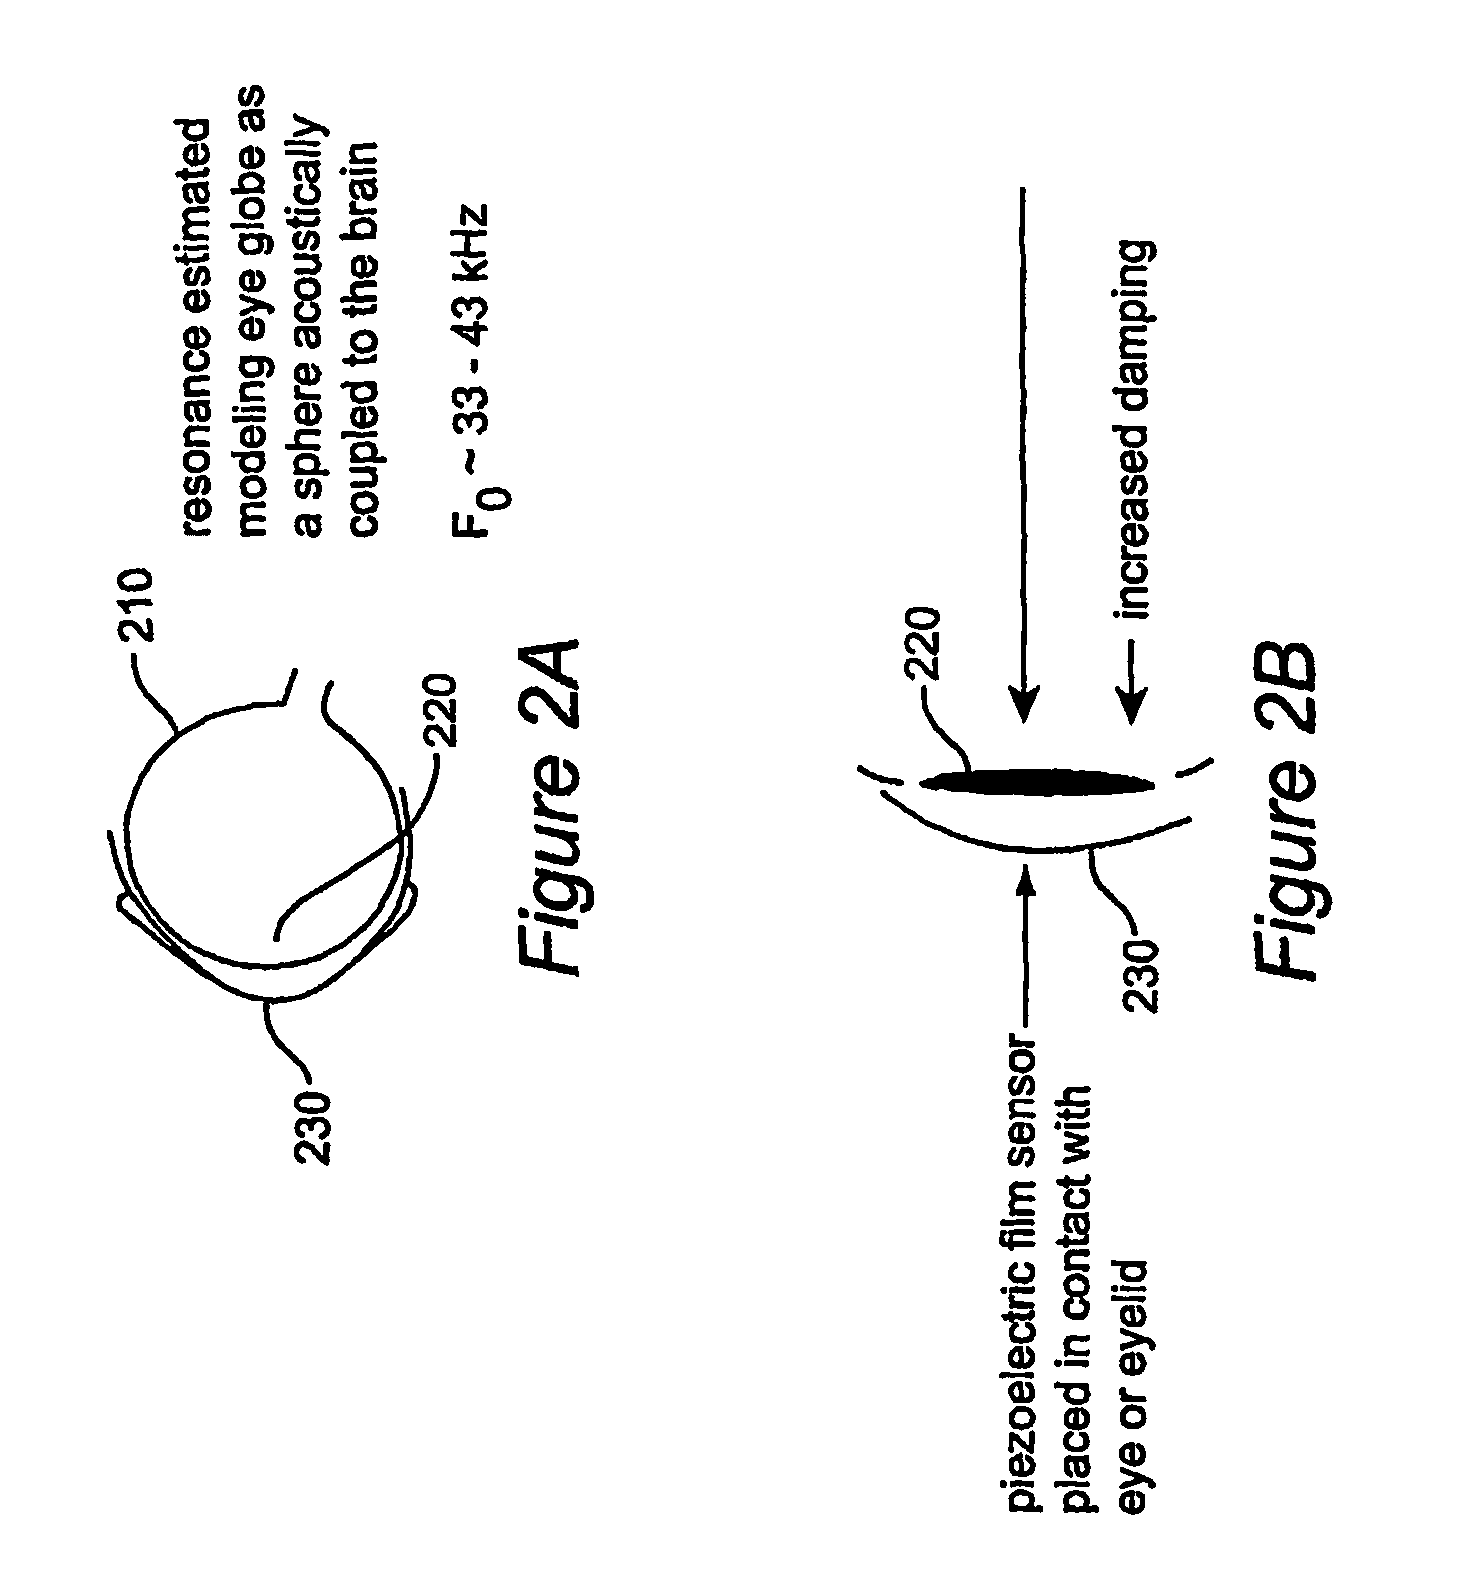 Method and apparatus for monitoring intra ocular and intra cranial pressure